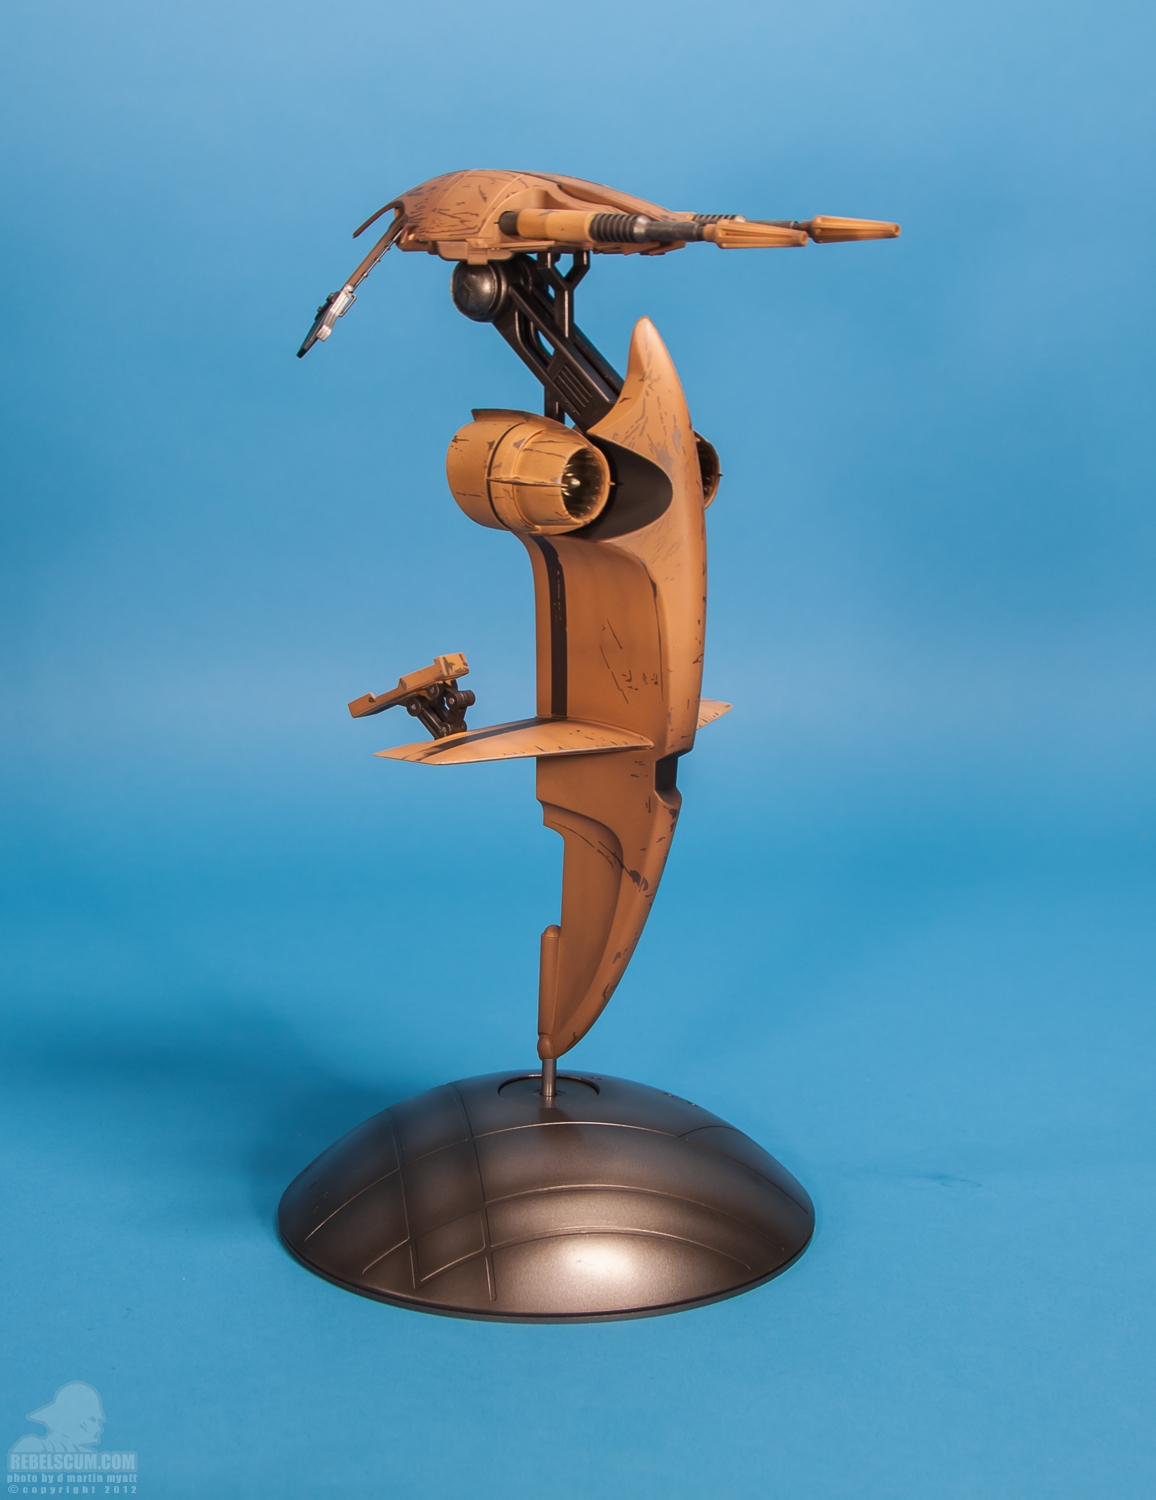 STAP_Battle_Droid_Star_Wars_Sideshow_Collectibles-02.jpg